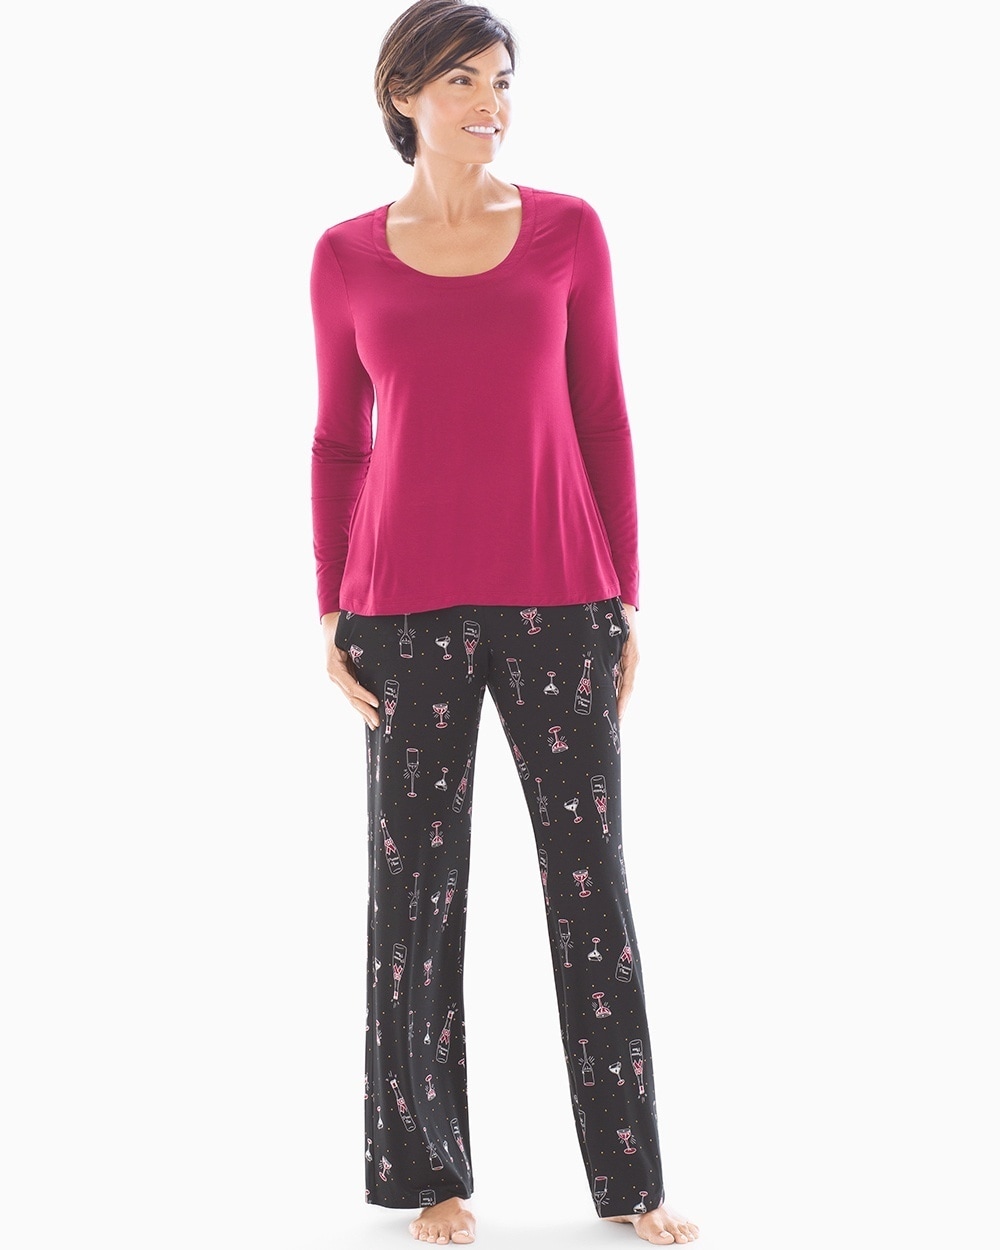 Cool Nights Scoopneck Long Sleeve Pajama Set Prosecco Please with Cranberry